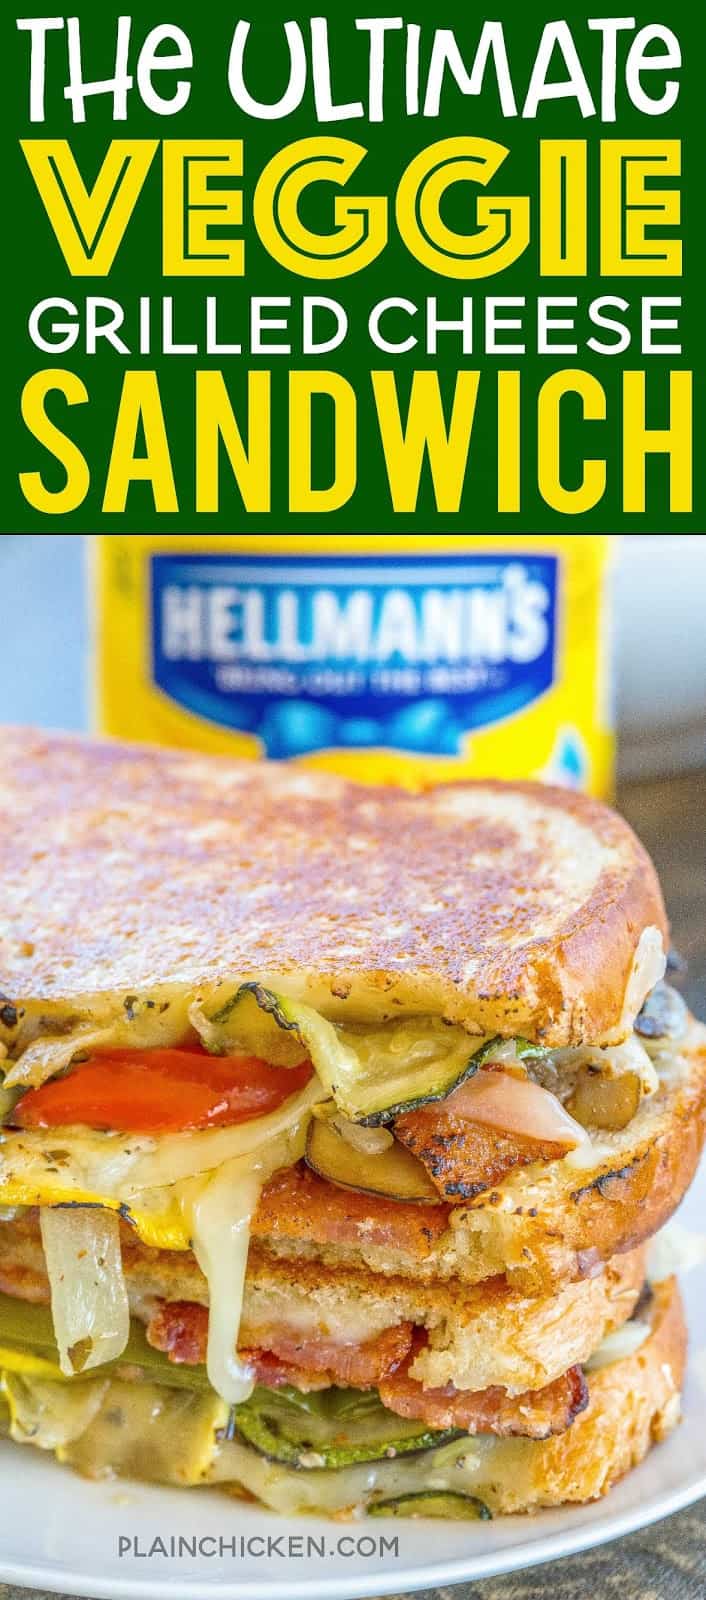 The Ultimate Veggie Grilled Cheese Sandwich - perfectly crispy and delicious!!! Roast the veggies ahead of time for a super quick meal later!! The key to this sandwich is Hellmann's Mayonnaise on the OUTSIDE of the sandwich. It makes all the difference! I know it sounds strange, but it is AH-MAZ-ING! Eggplant, zucchini, mushrooms, squash, bell peppers, onions, white cheddar, wheat bread and Hellmann's Mayonnaise. Seriously THE BEST! #strangewich #EatBetterLiveBetter #Walmart #ad